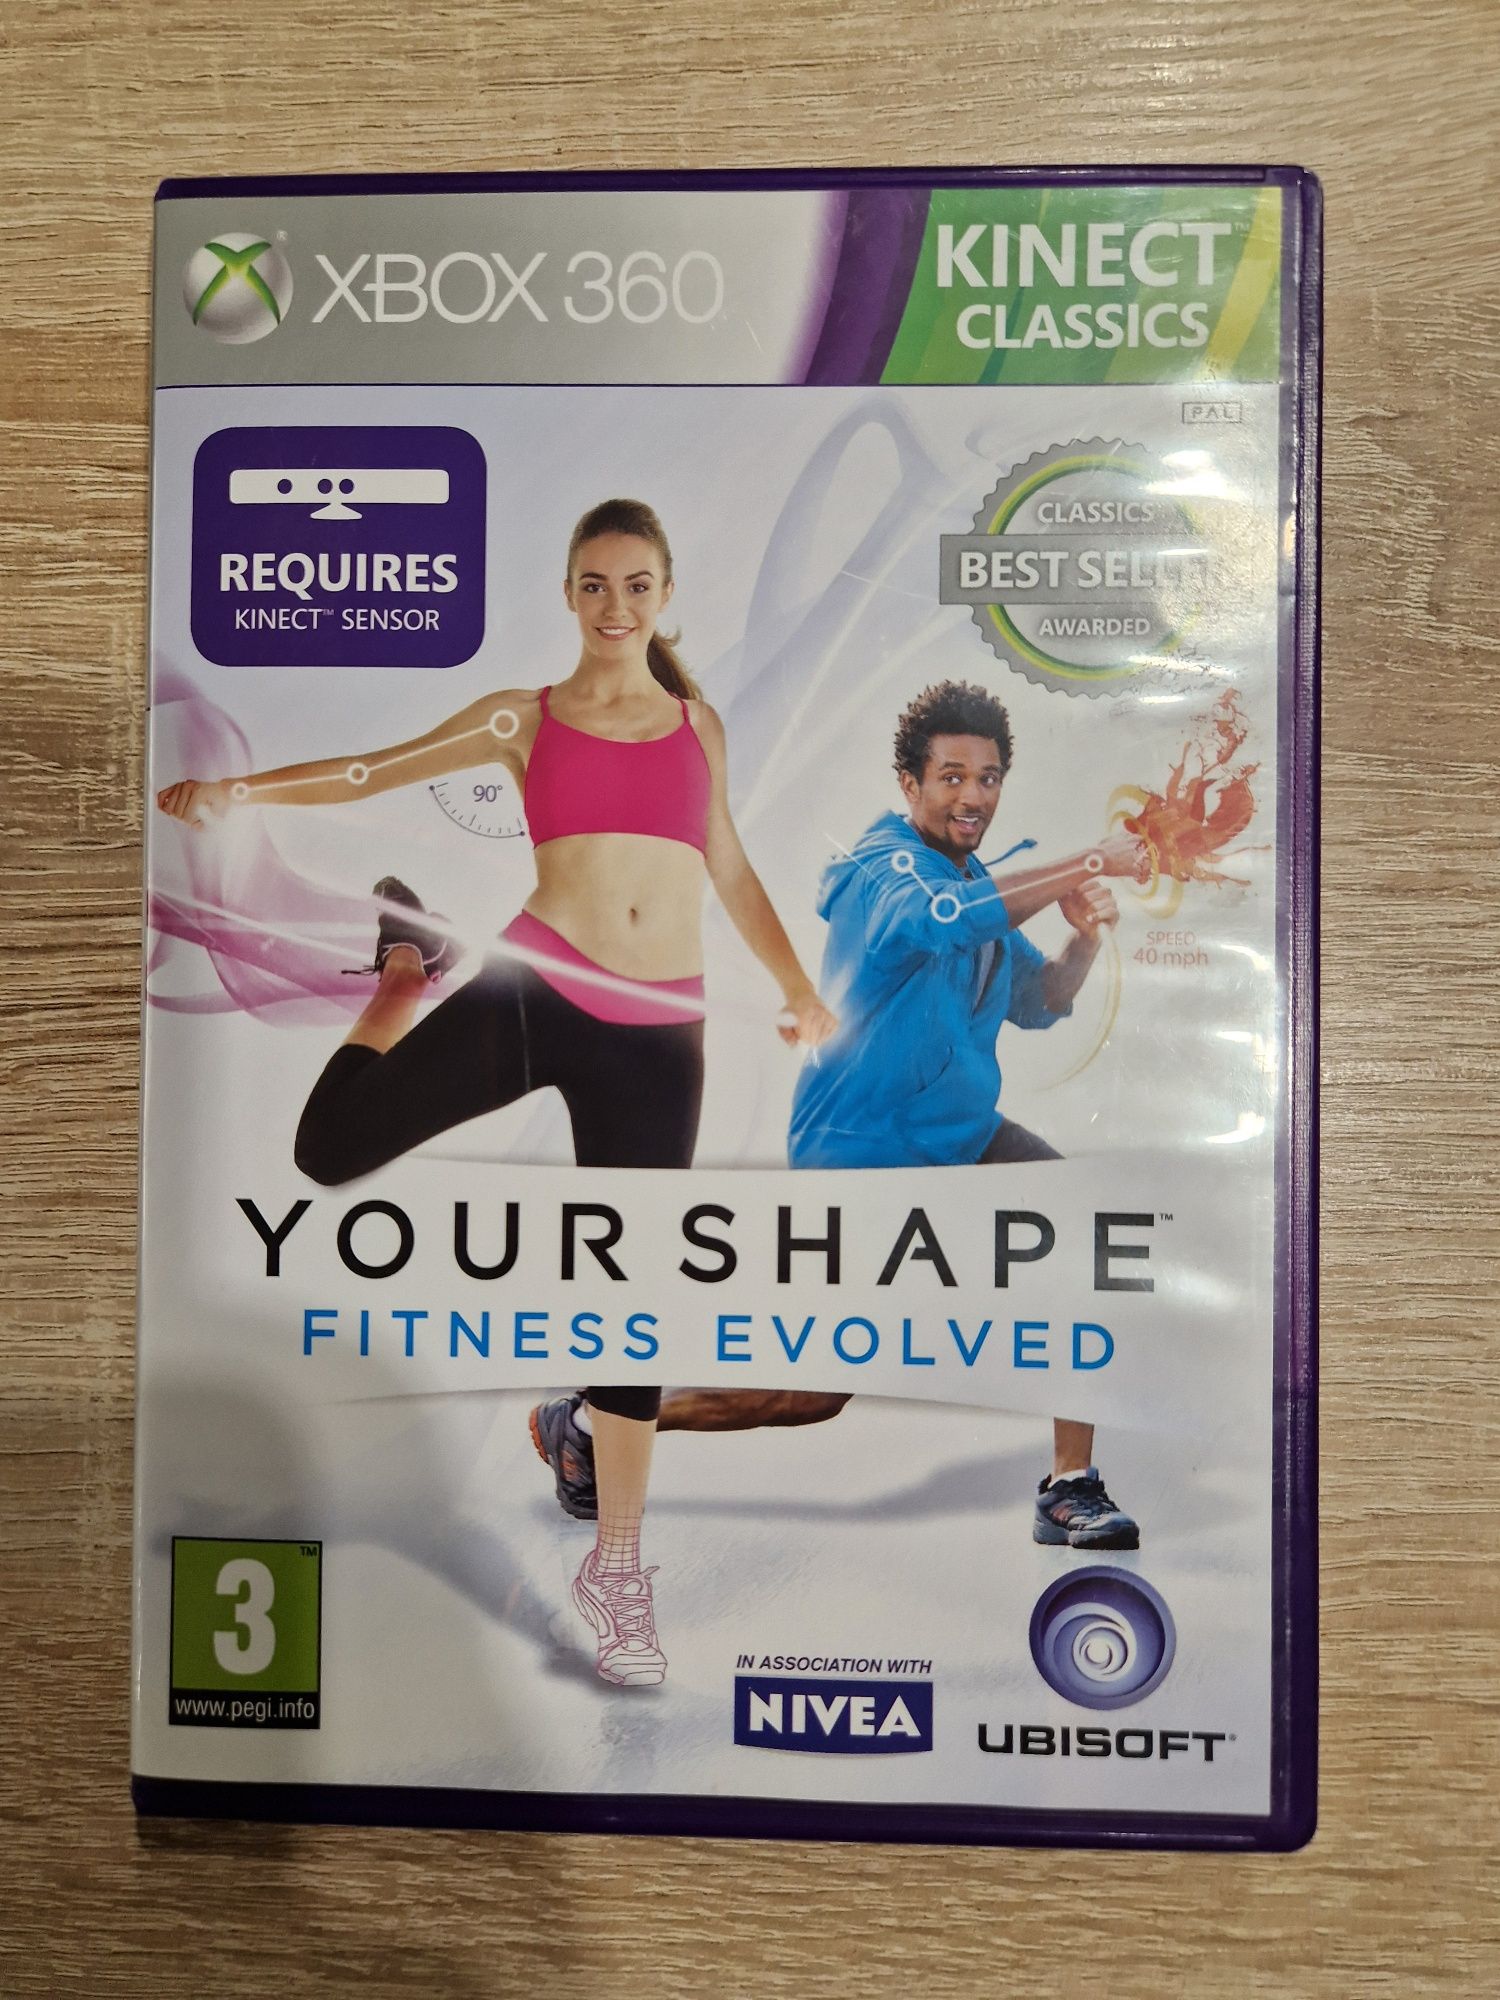 Your shape fitness evolved xbox360